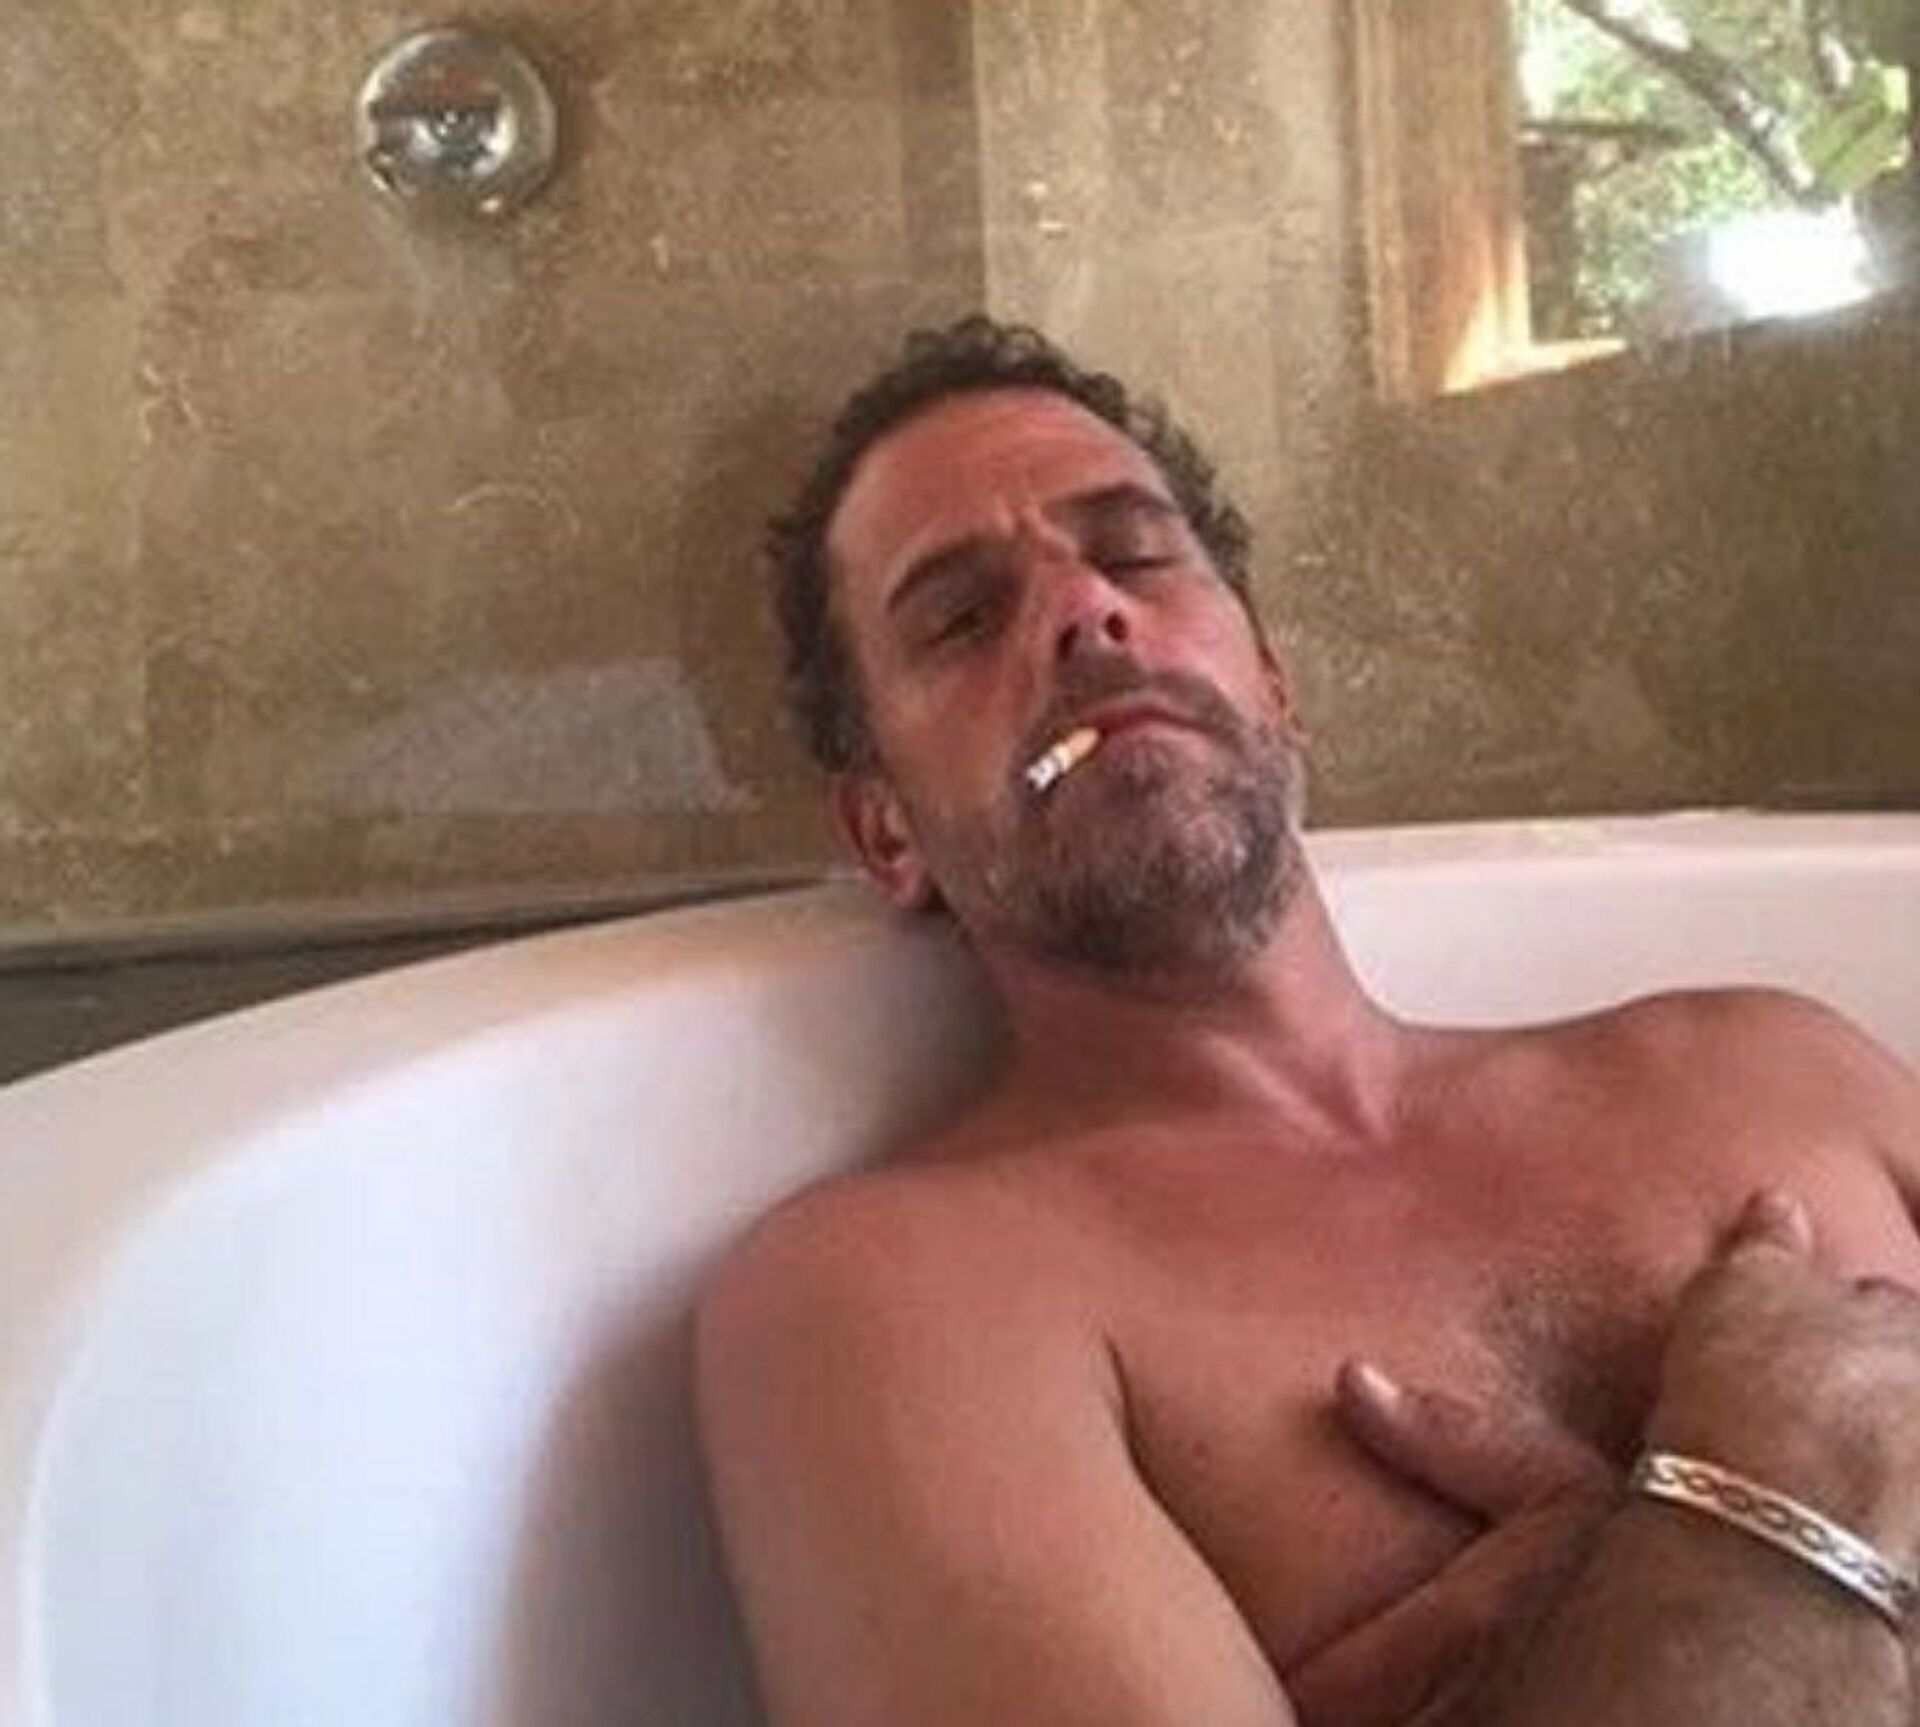 Photo of Hunter Biden relaxing in a bathtub, reportedly taken from a computer dropped off at a Delaware computer repair shop. - Sputnik International, 1920, 21.03.2022